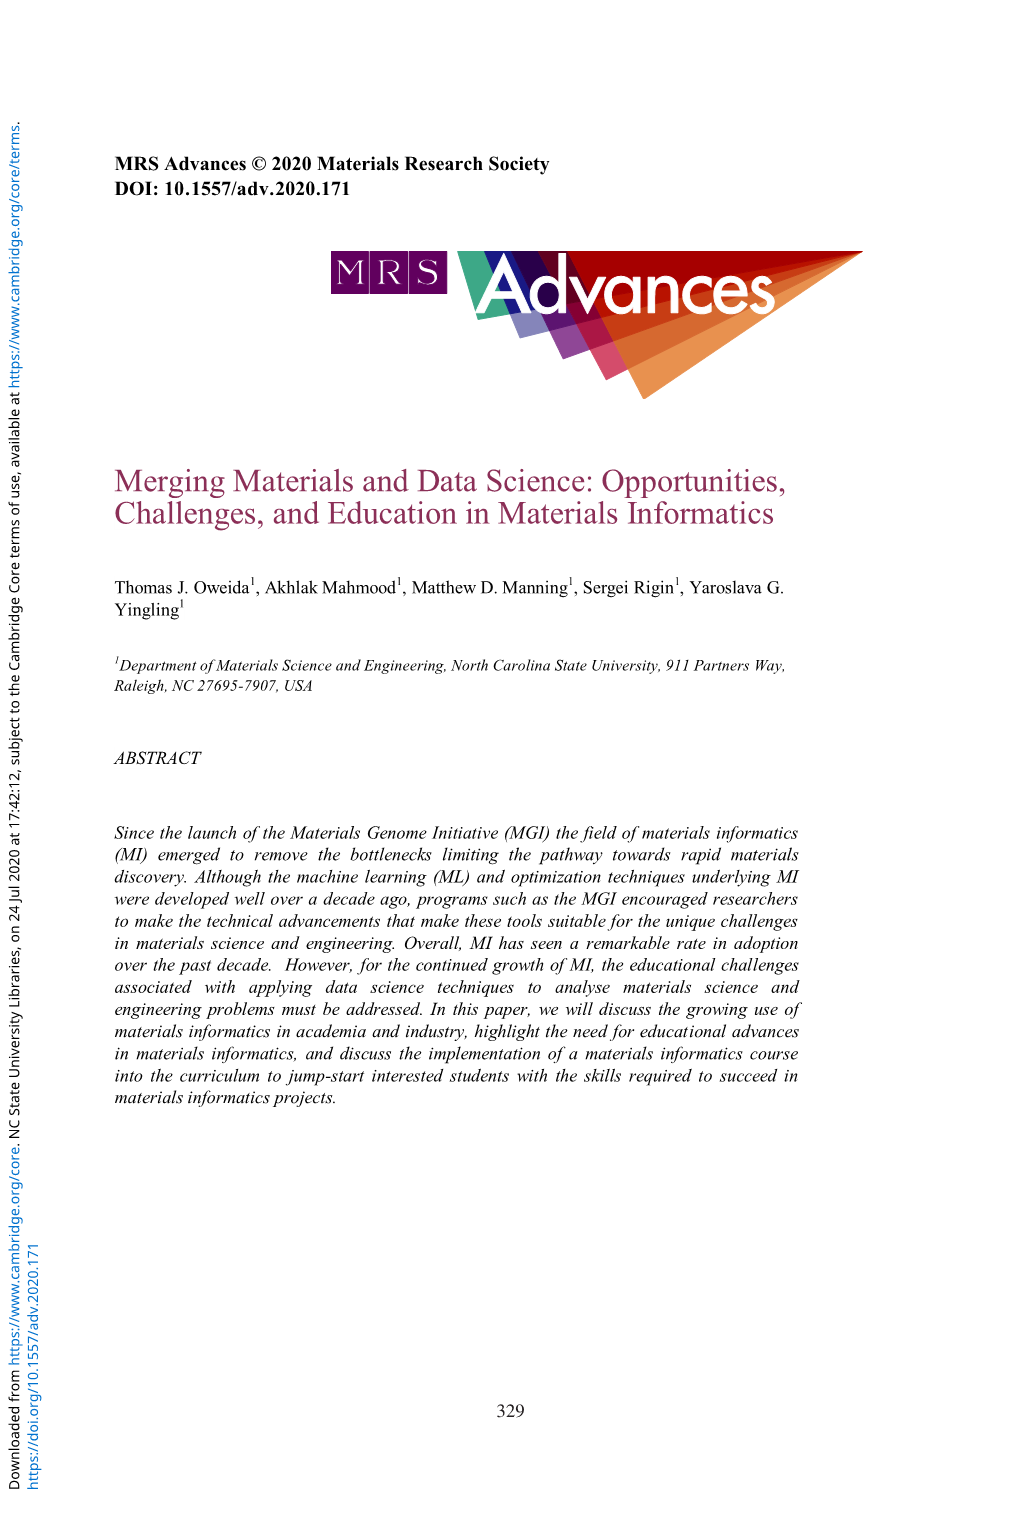 Merging Materials and Data Science: Opportunities, Challenges, and Education in Materials Informatics